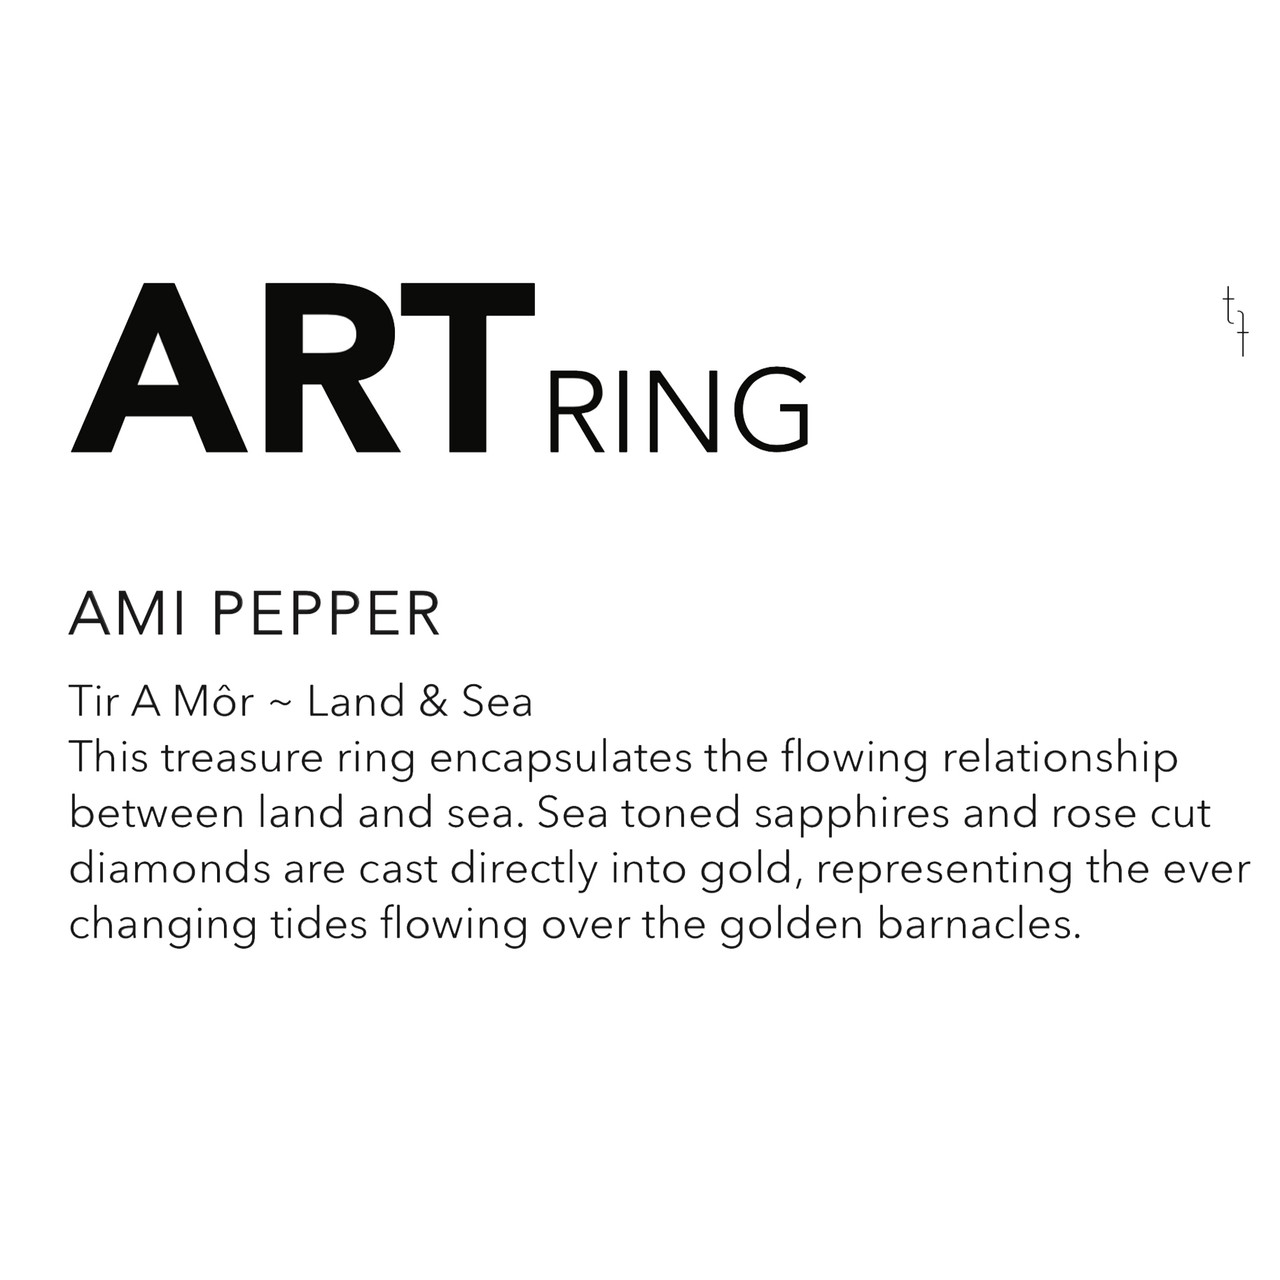 Tir a Môr Art Ring by Ami Pepper available at tomfoolery London as a part of Art Ring 2021 exhibition.